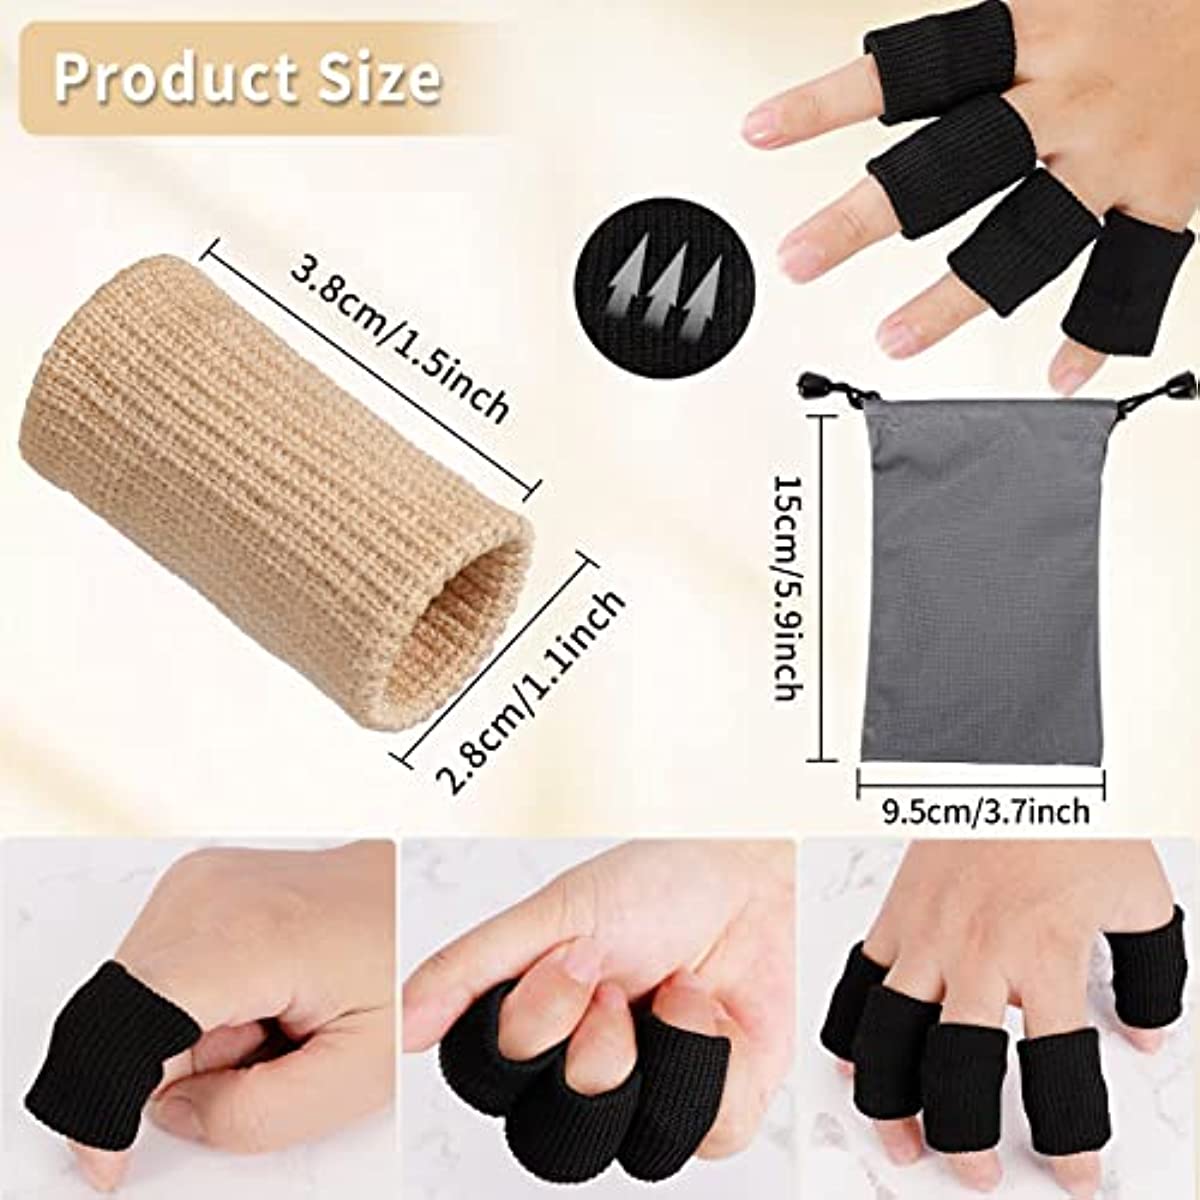 30 Pieces Finger Sleeves,Elastic Compression Protector with 1 Storage Bag,Finger Compression Sleeves,Elastic Thumb Sleeve,Finger Protector Sleeve for Relieving Pain Sports(Black + Beige)